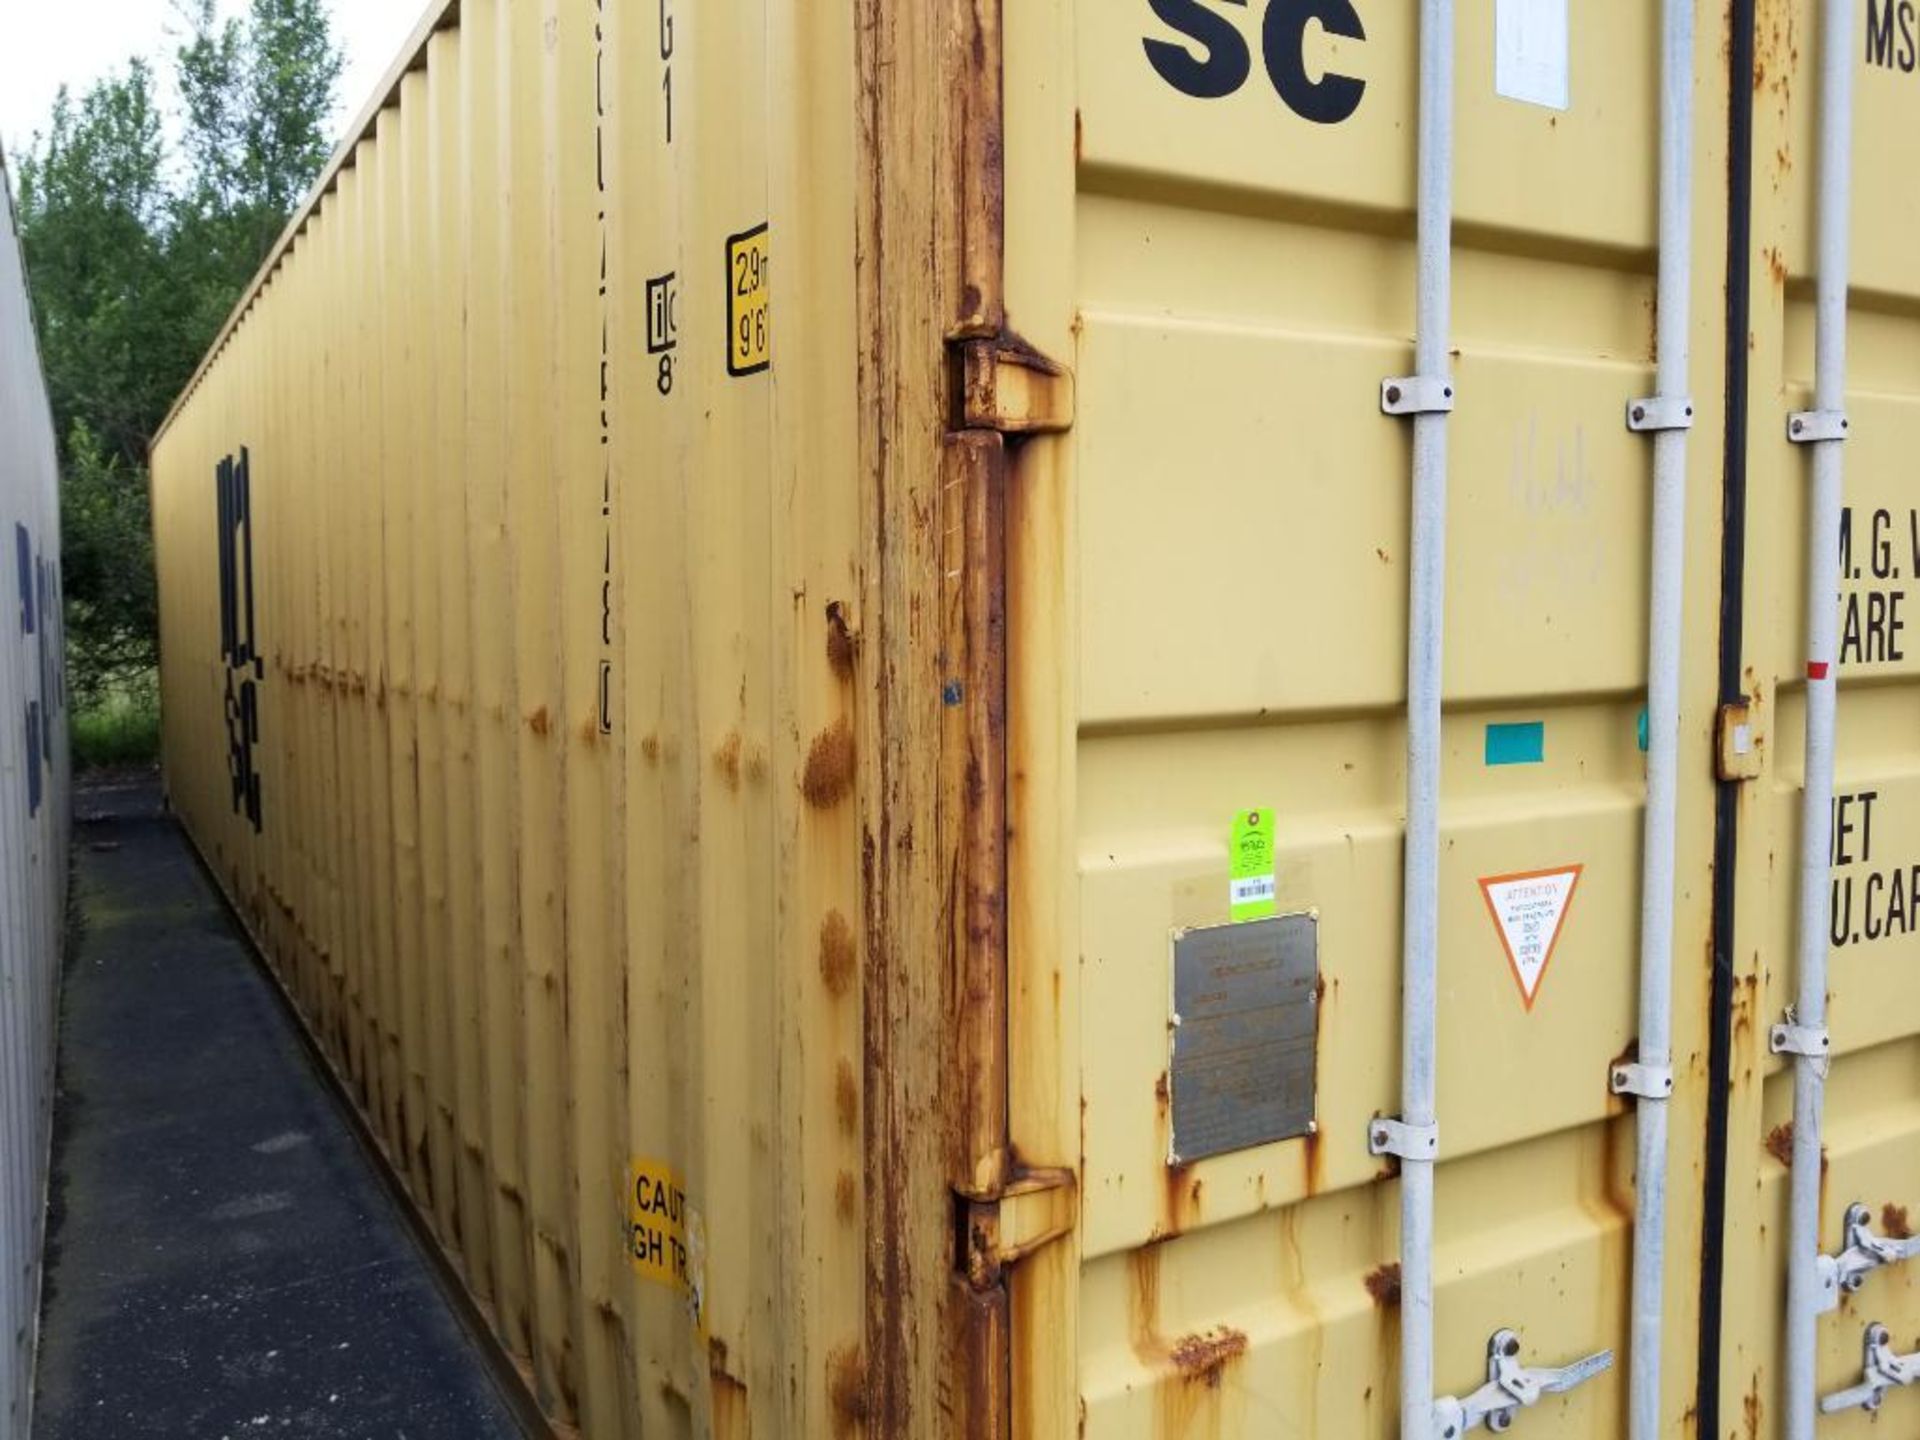 2006 Storage container. 40ft length. 9ft 6in tall. Type NL40H-181A. Max gross weight 67,200lbs. - Image 4 of 9